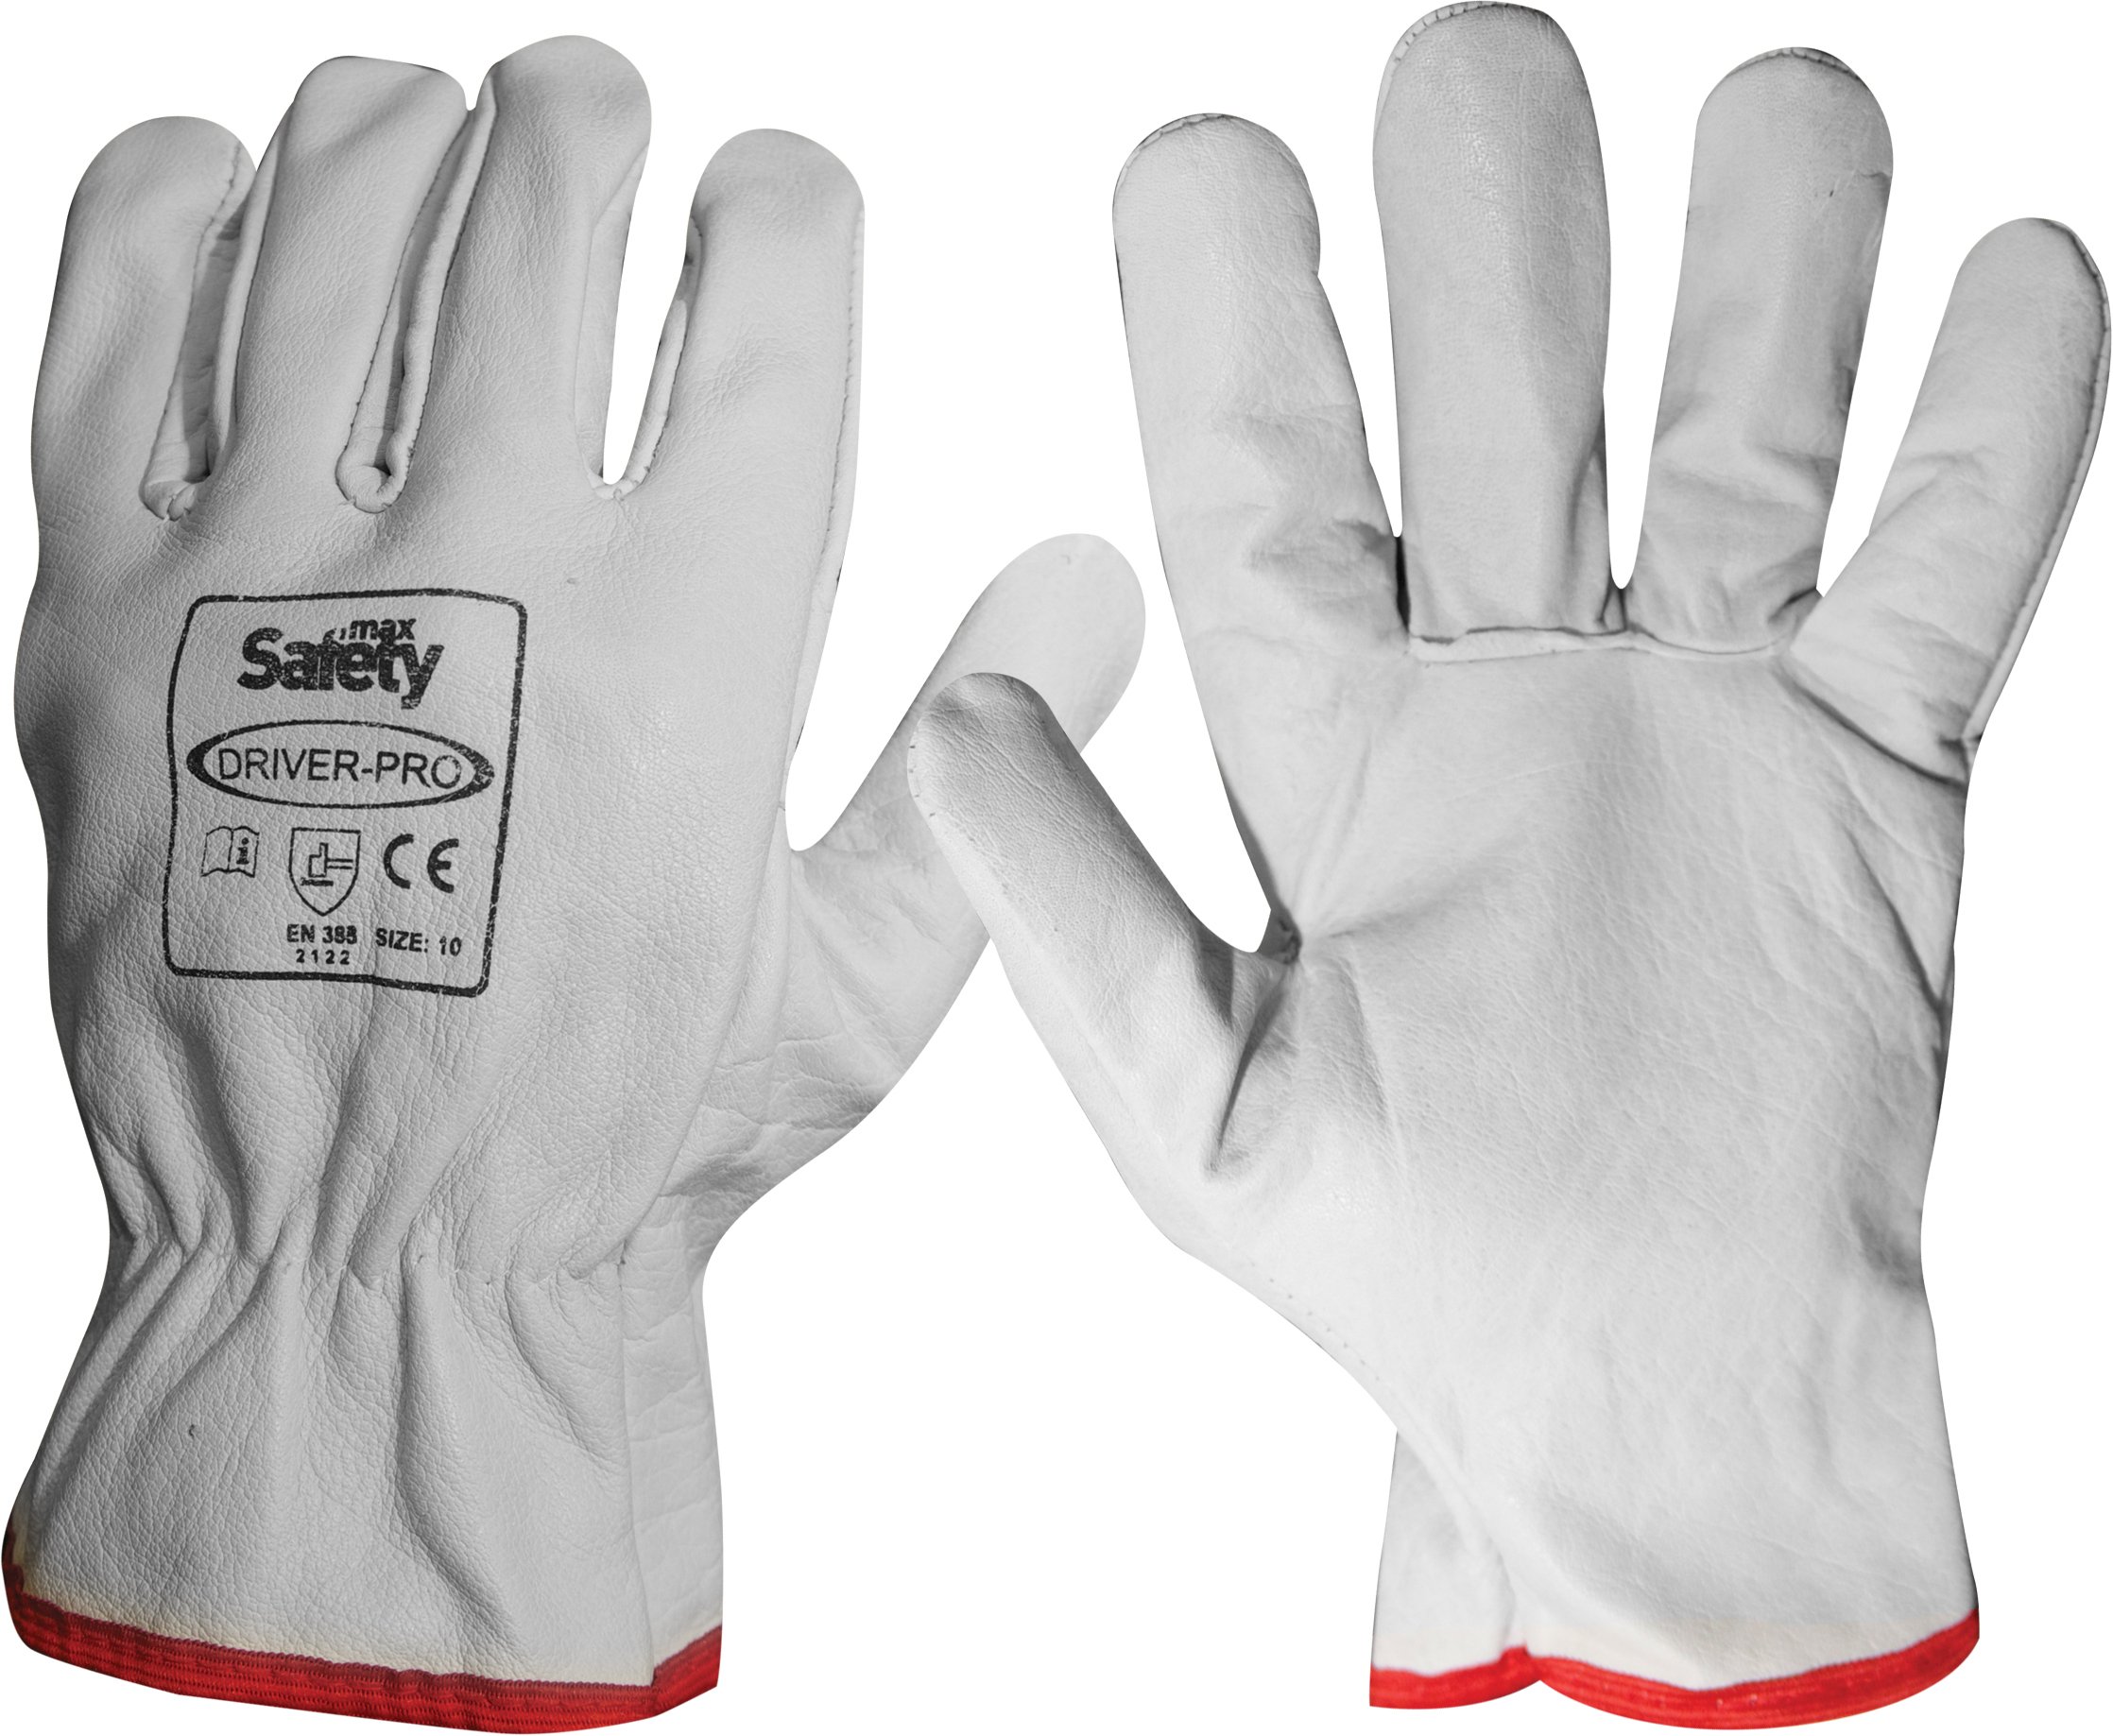 MAXSAFETY DRIVER-PRO LEATHER DRIVER GLOVES